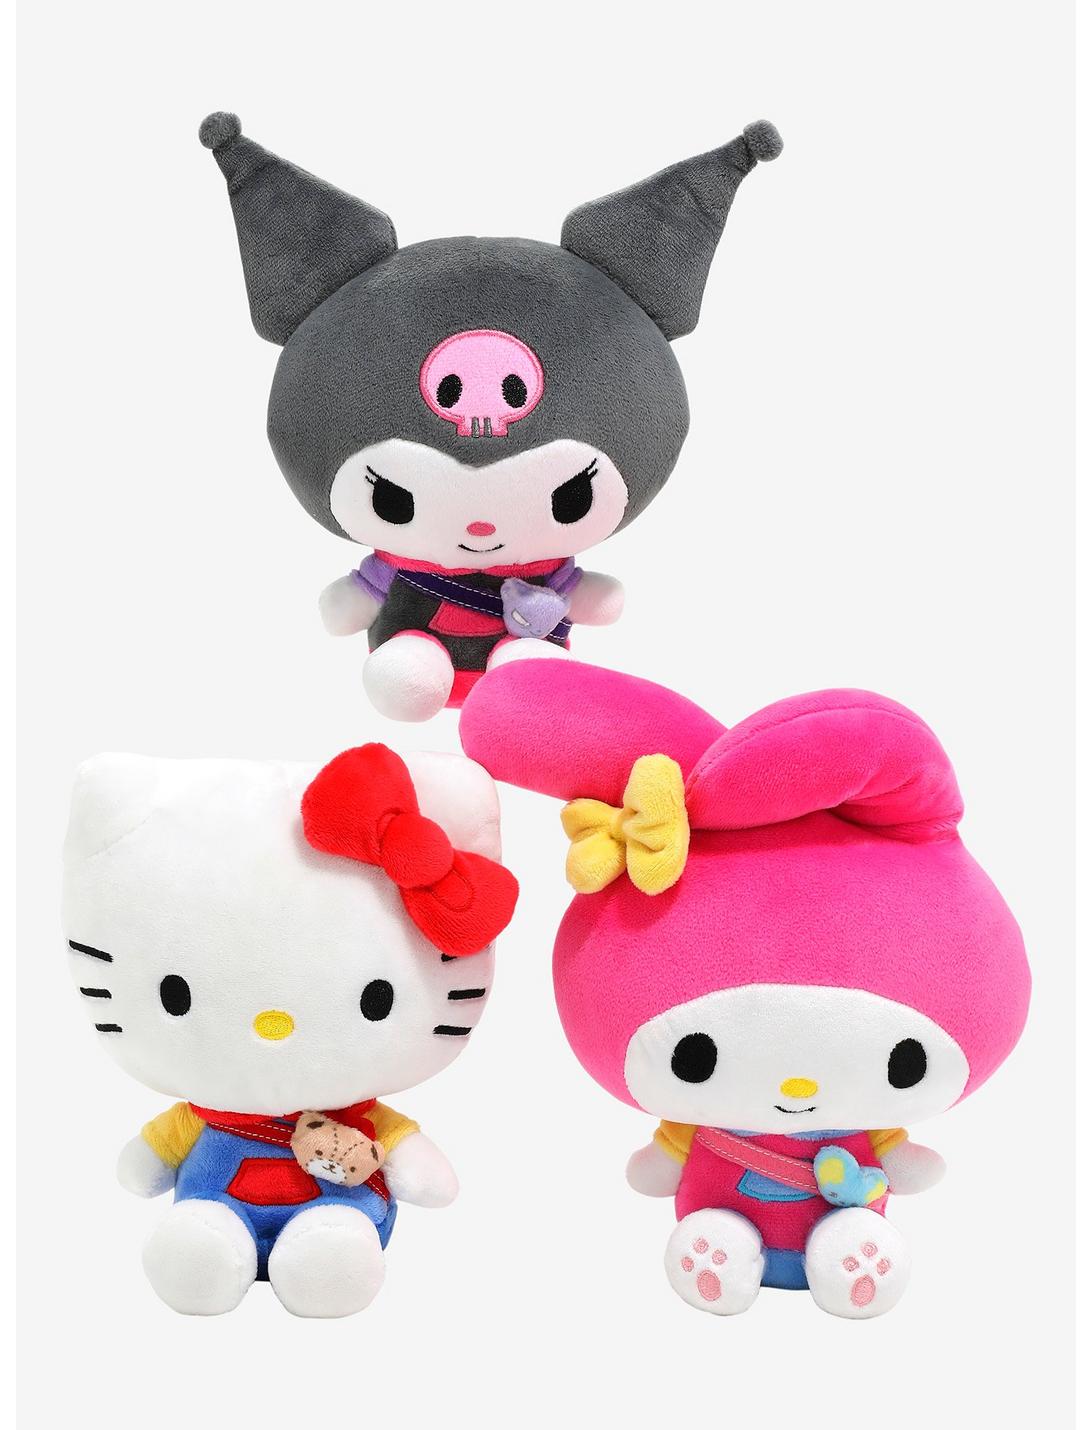 Sanrio Hello Kitty and Friends Blind Assortment 8 Inch Plush, , hi-res